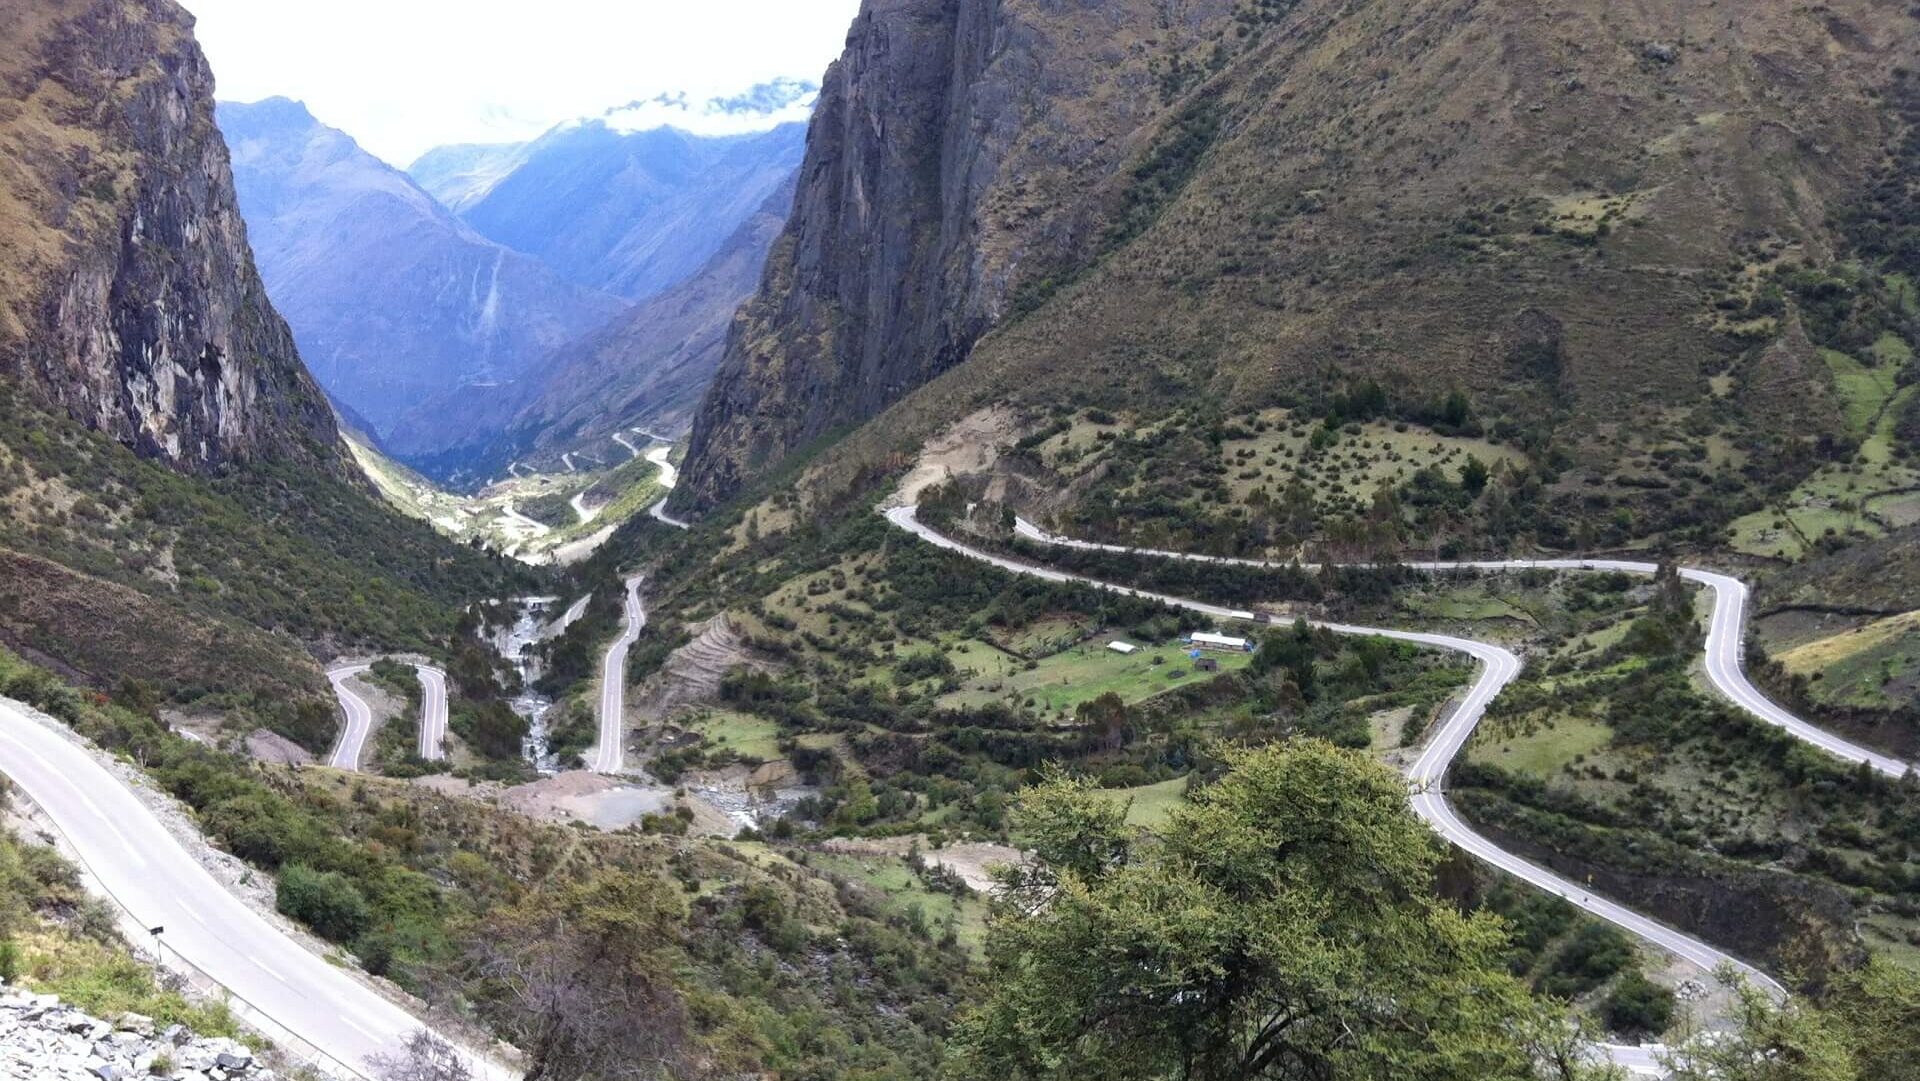 The Abra Malaga pass on the Back Door Route to Machu Picchu is also visited on the Road Trip developed by RESPONSible Travel Peru